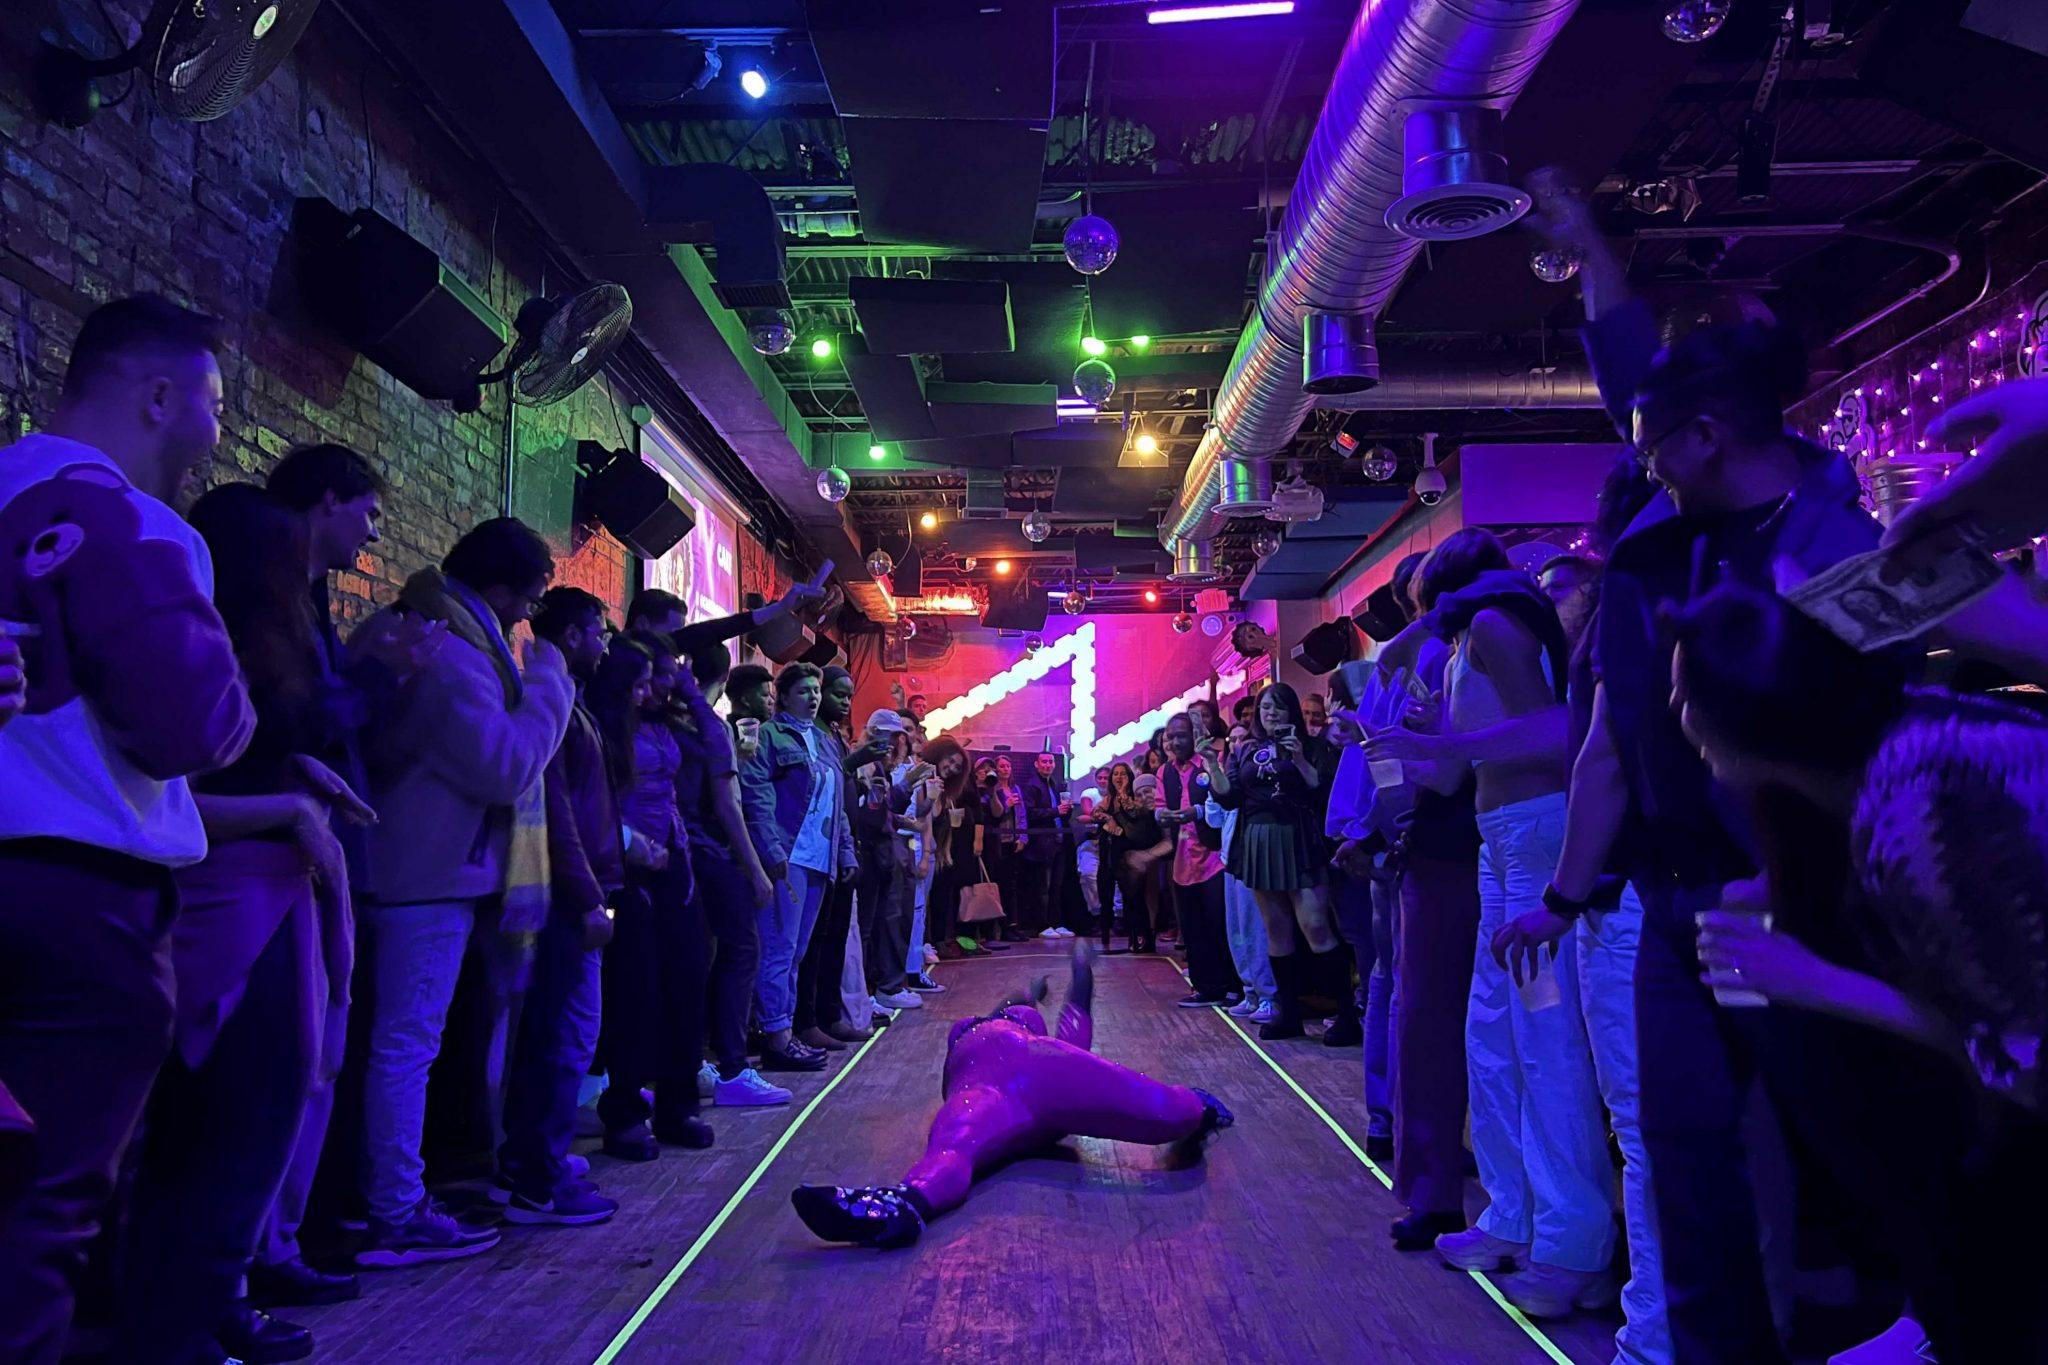 Lesbian bar in DC brings queer people together with fun, comedy and performances photo image